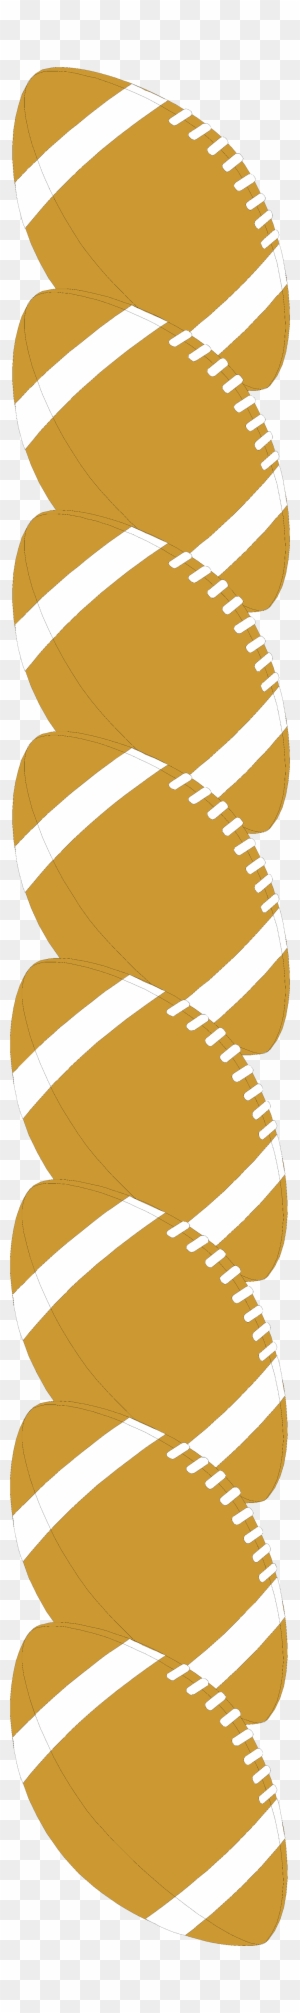 Clip Arts Related To - Free Clipart Football Border